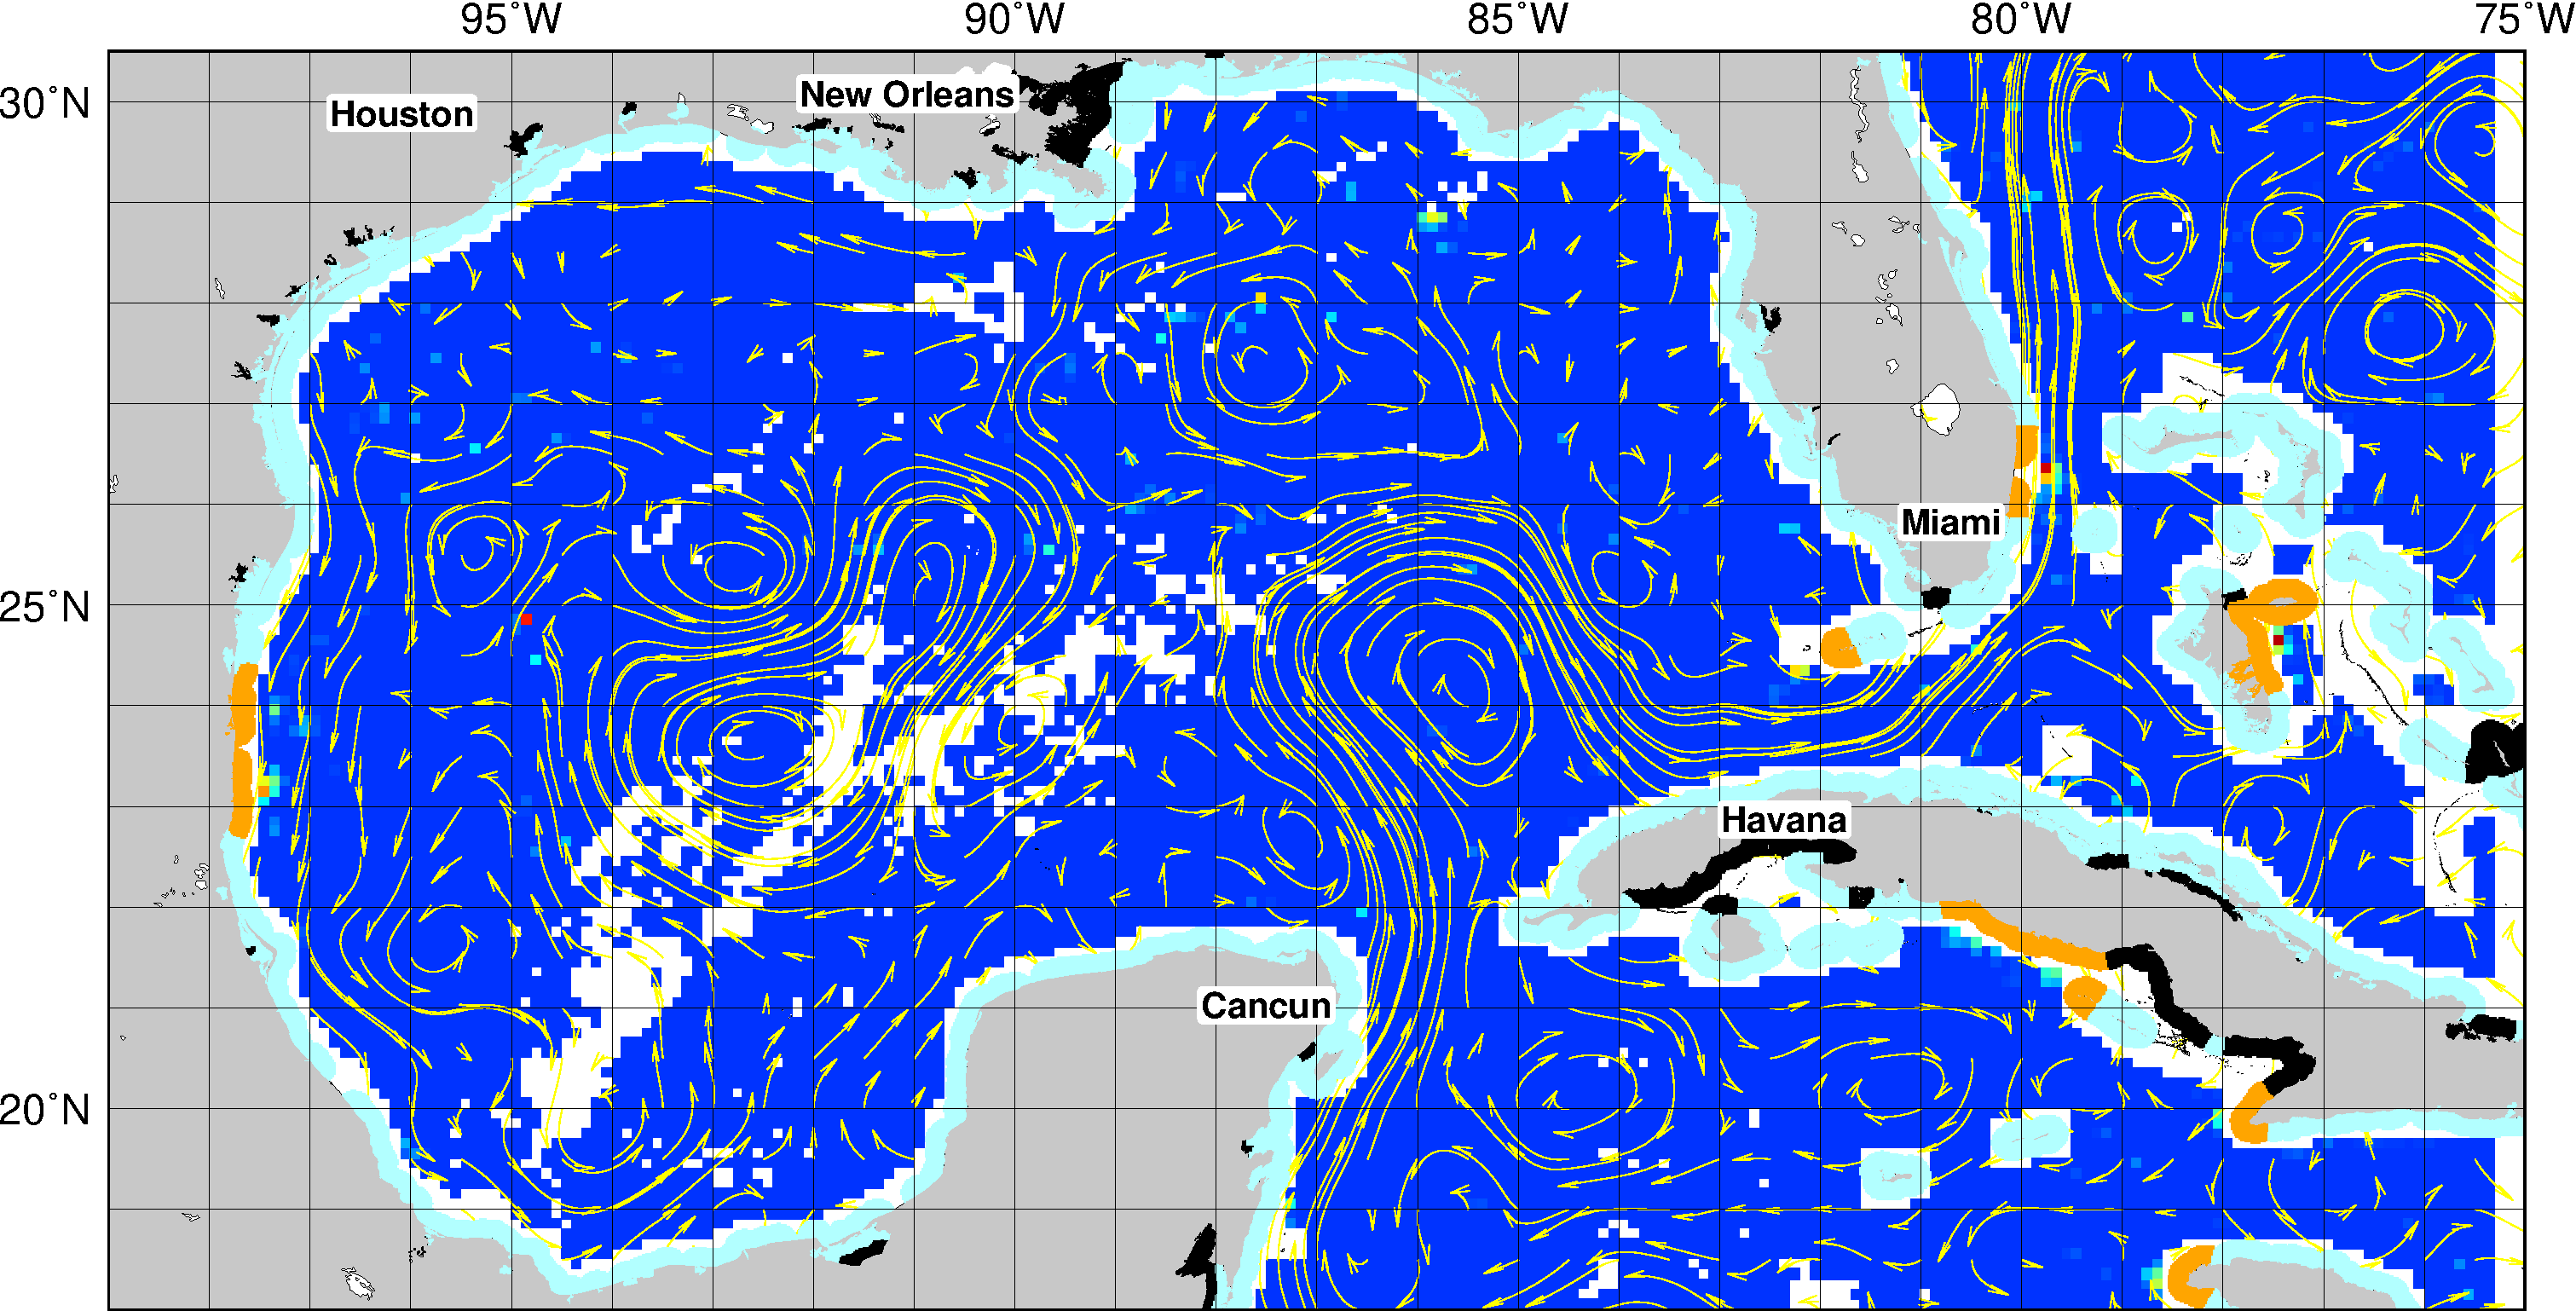 The University of South Florida’s Alternative Floating Algae Index is used as a core input to analyze coastal areas at a resolution of 50km per pixel. The risk of sargassum inundation is then classified into three categories. View the reports to learn more.